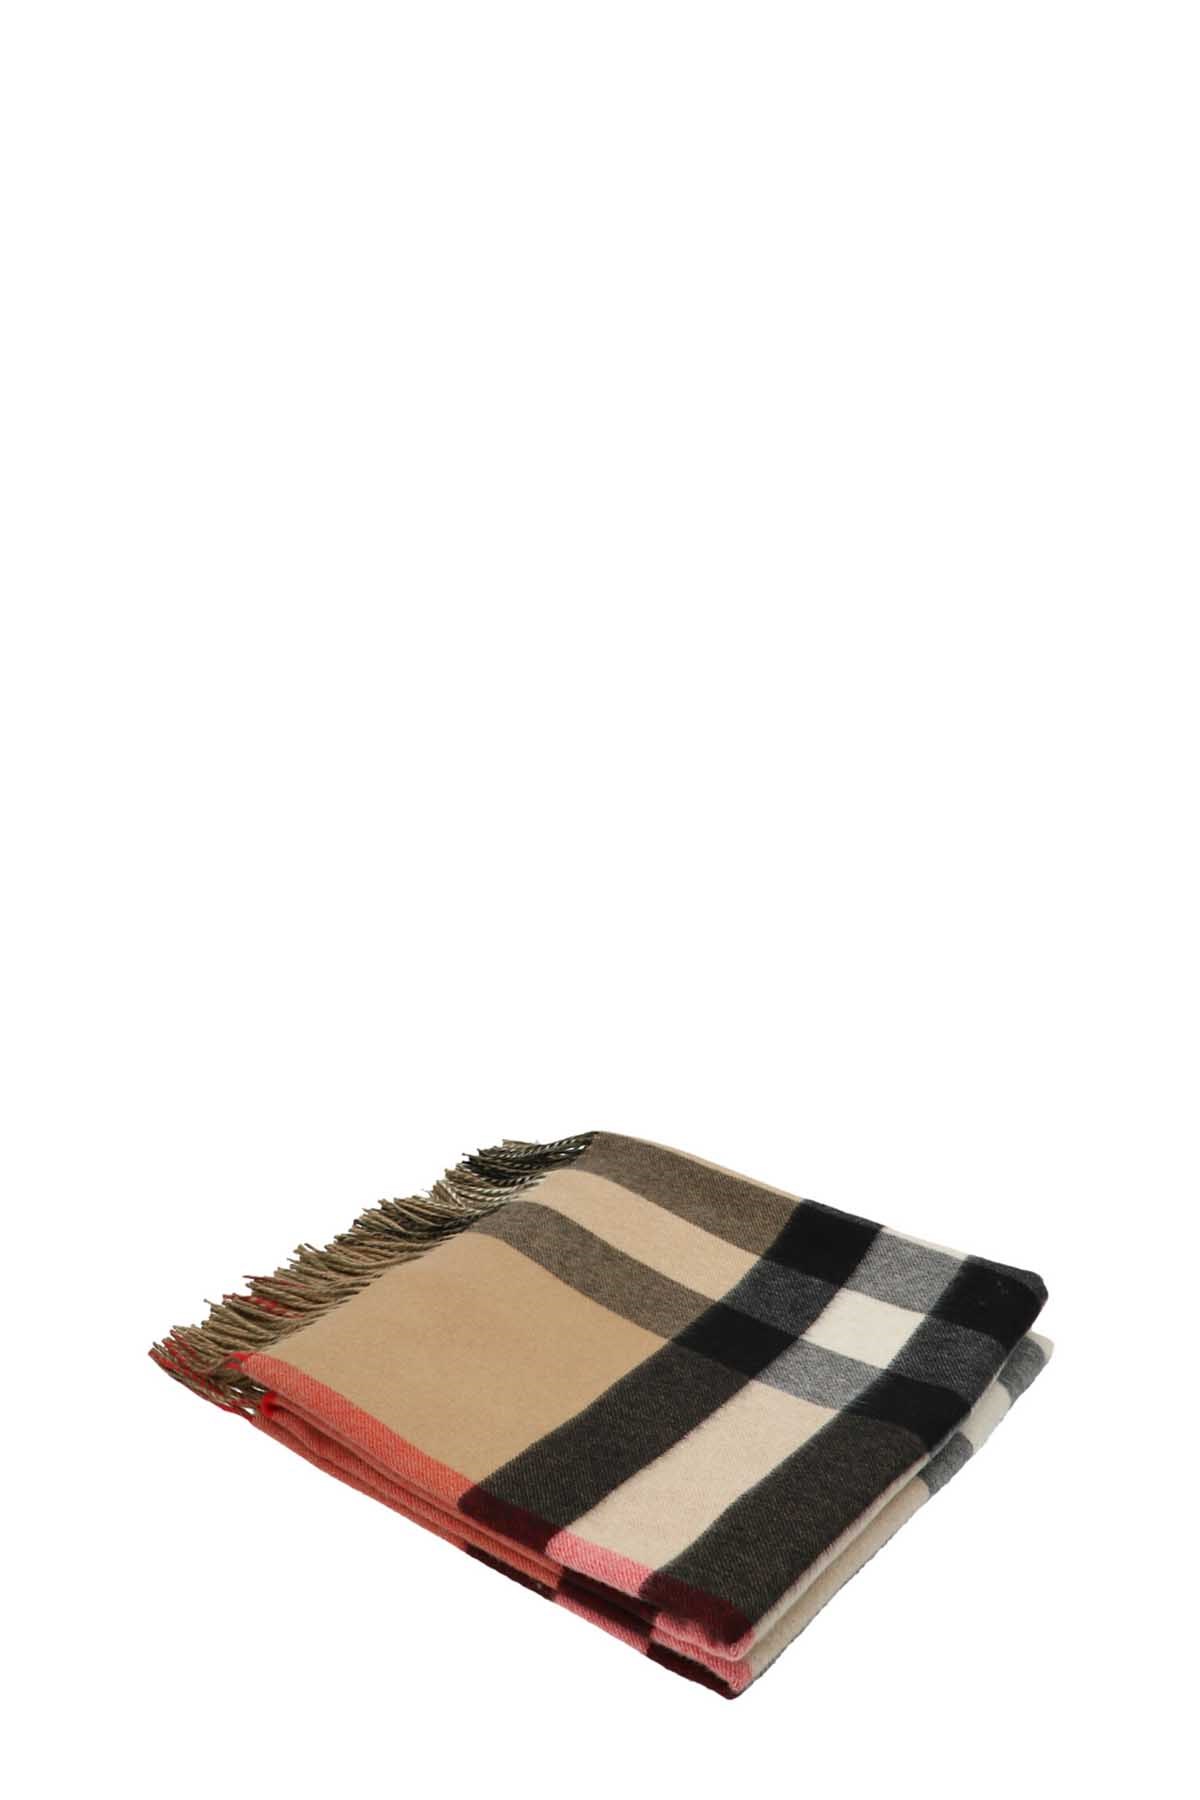 BURBERRY Check Double-Face Blanket